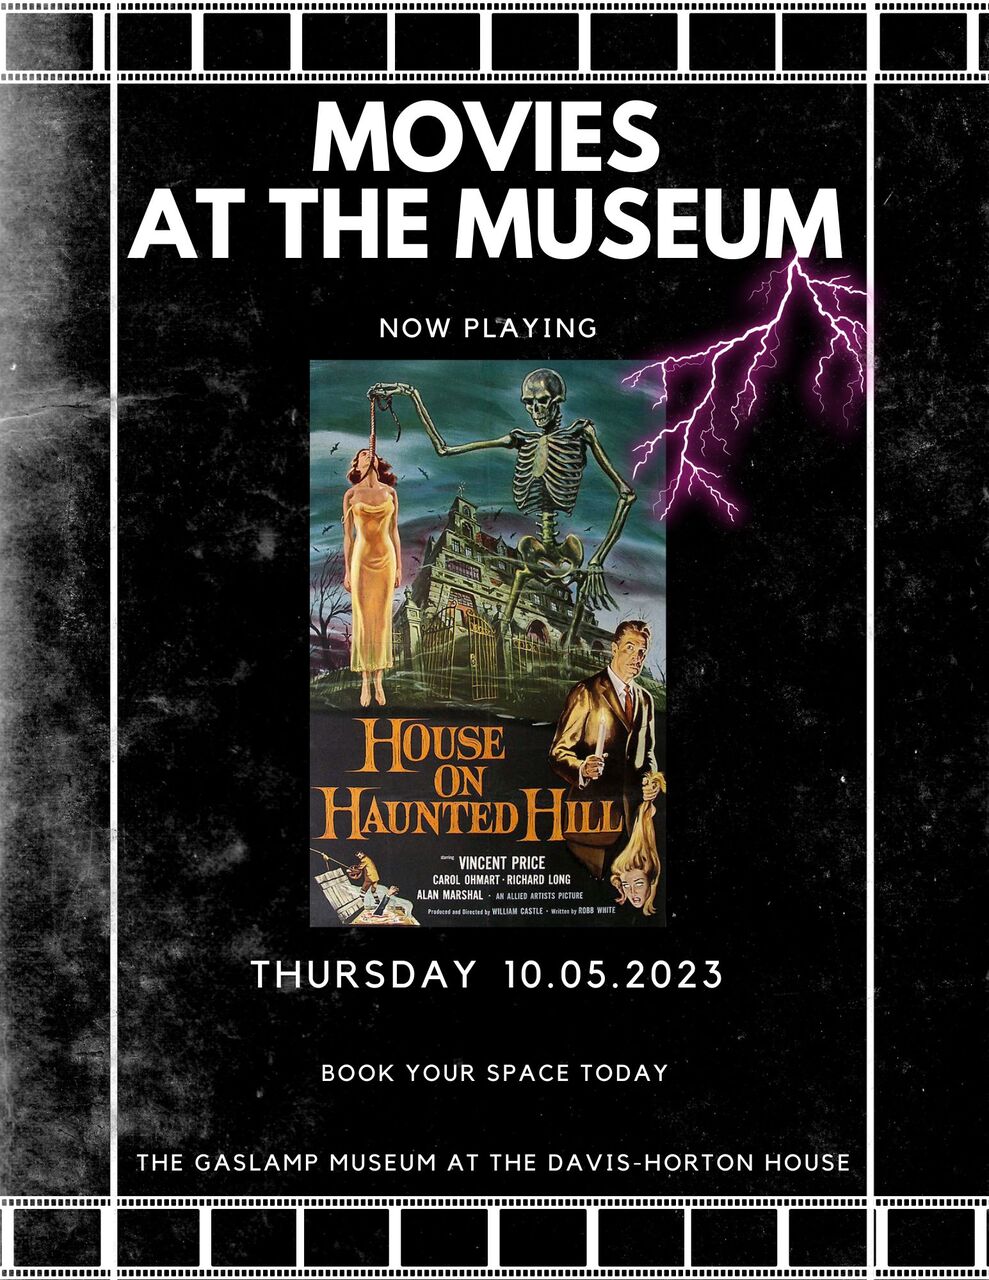 MOVIES AT THE GASLAMP MUSEUM